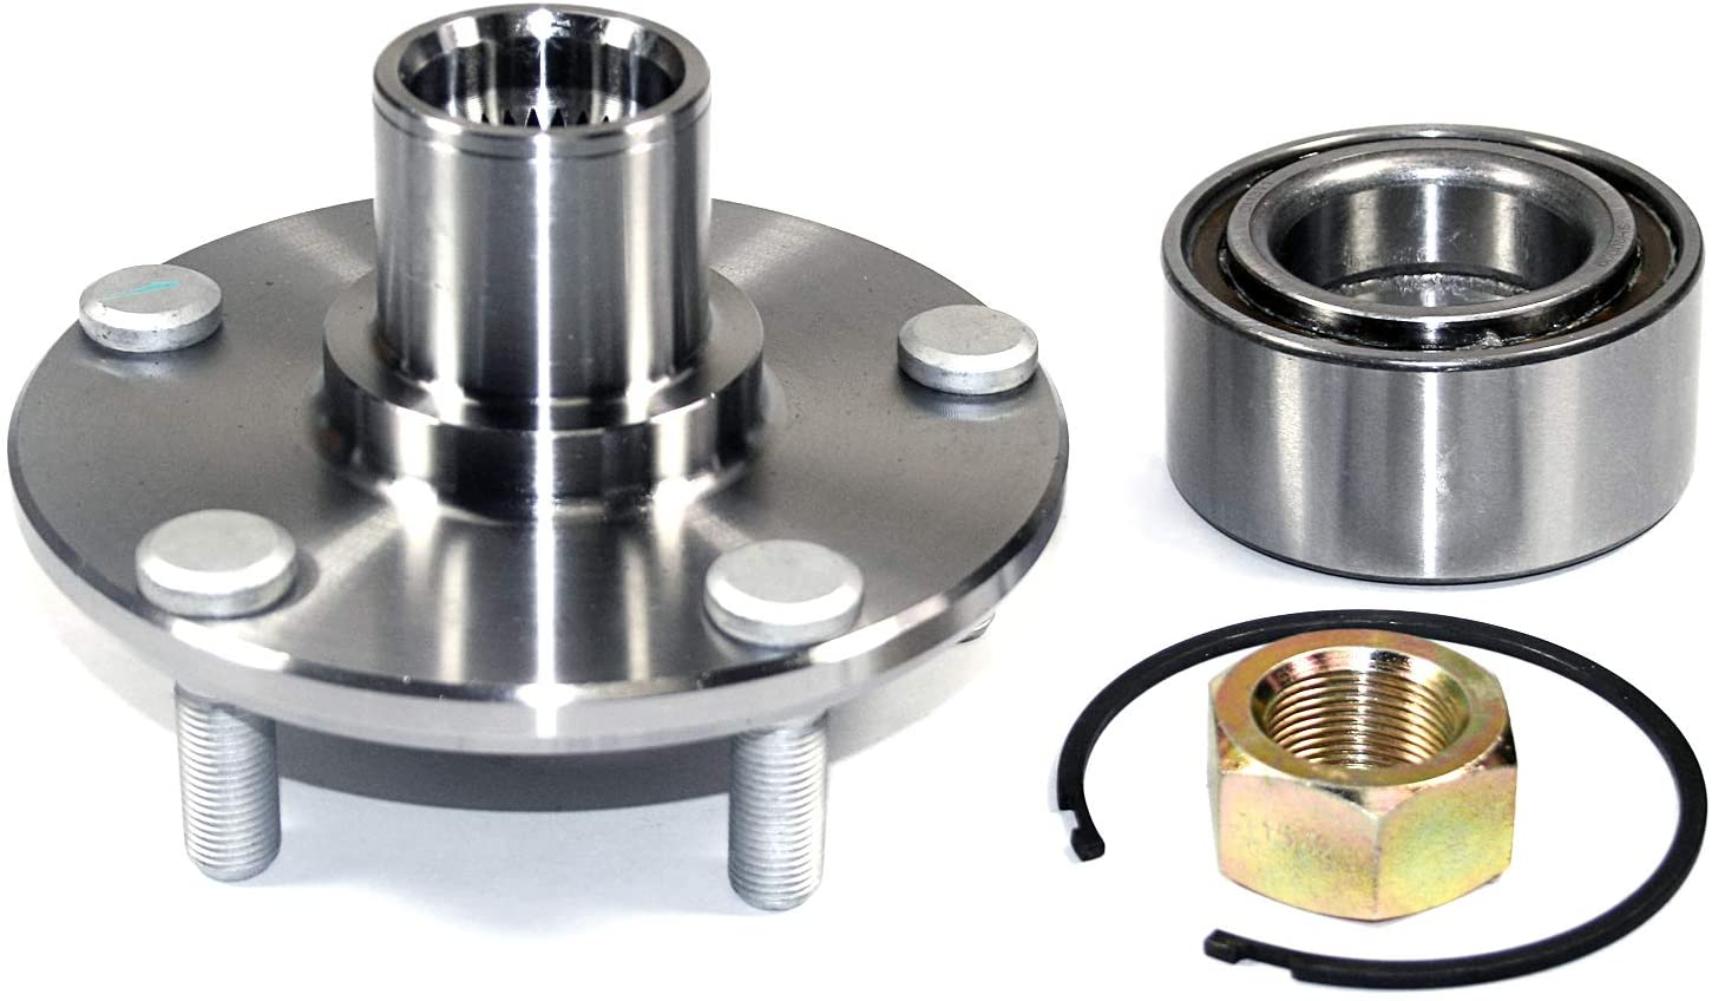 DuraGo 29596002 Front Wheel Hub Kit, Wheel Hub Repair Kits include all of the components required to restore the wheel hub and bearing to optimum condition By Brand DuraGo - image 2 of 4